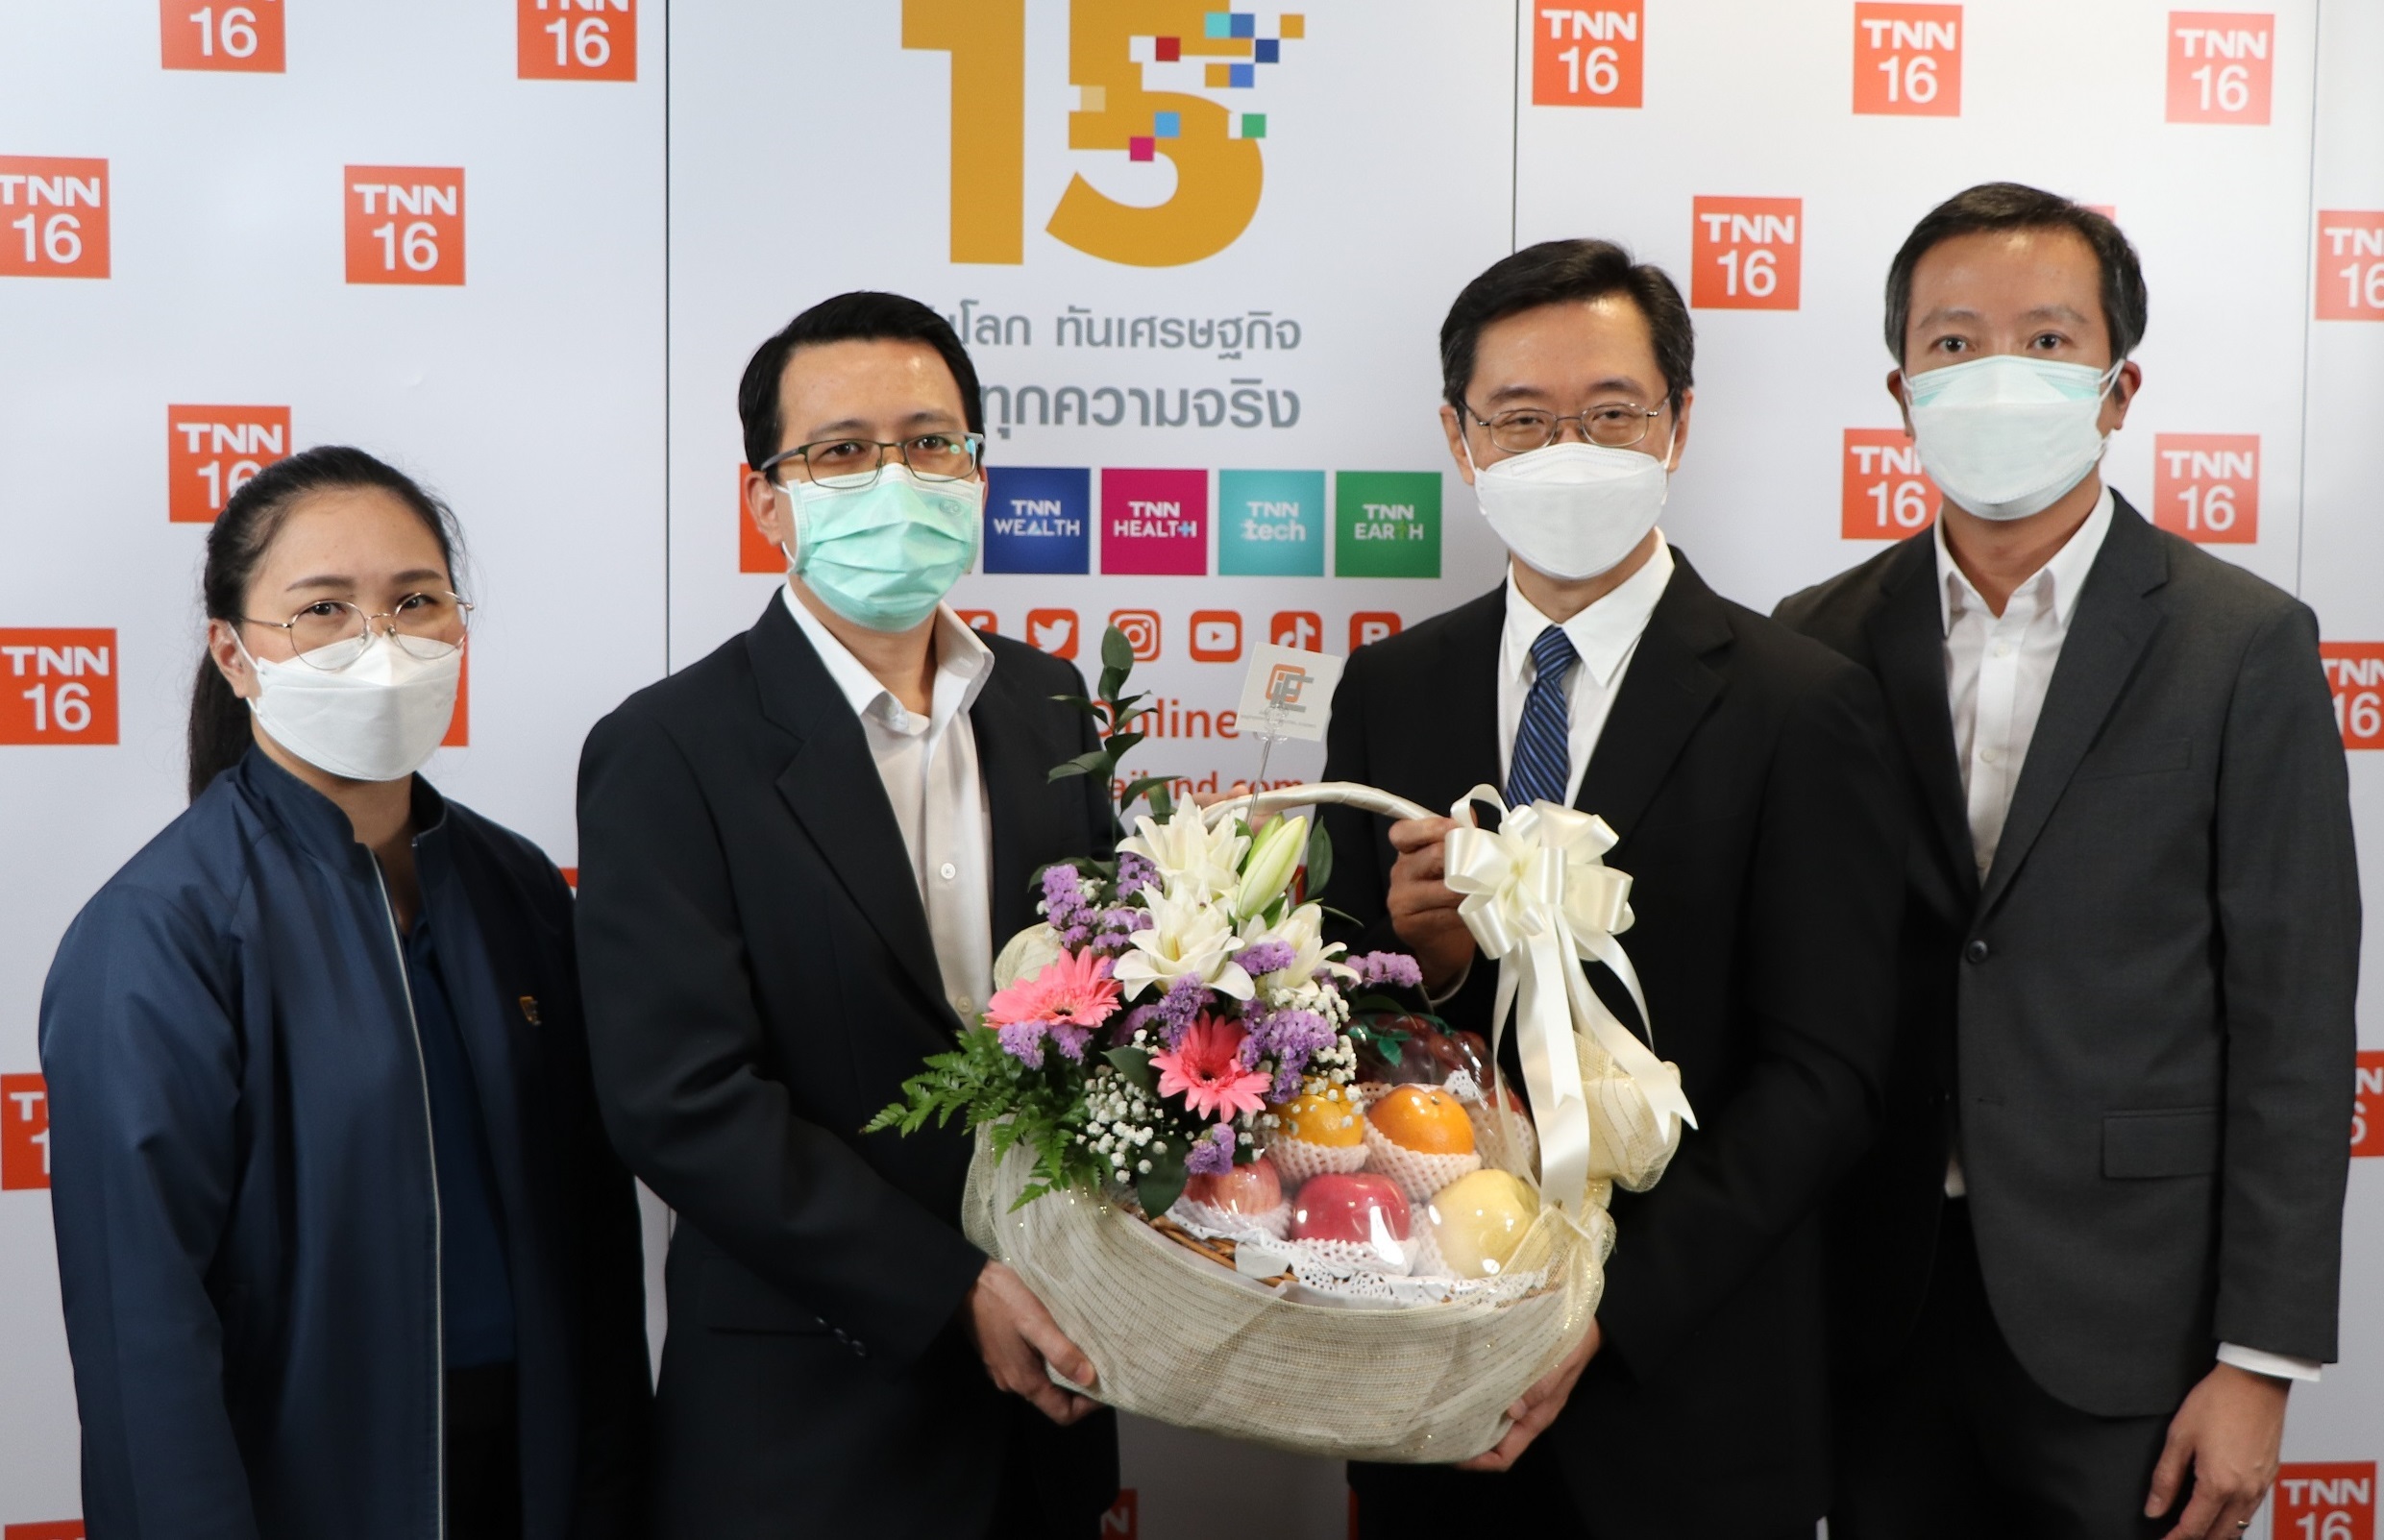 OIE Congratulates TV Station “TNN16” on the Occasion of the 15th Anniversary